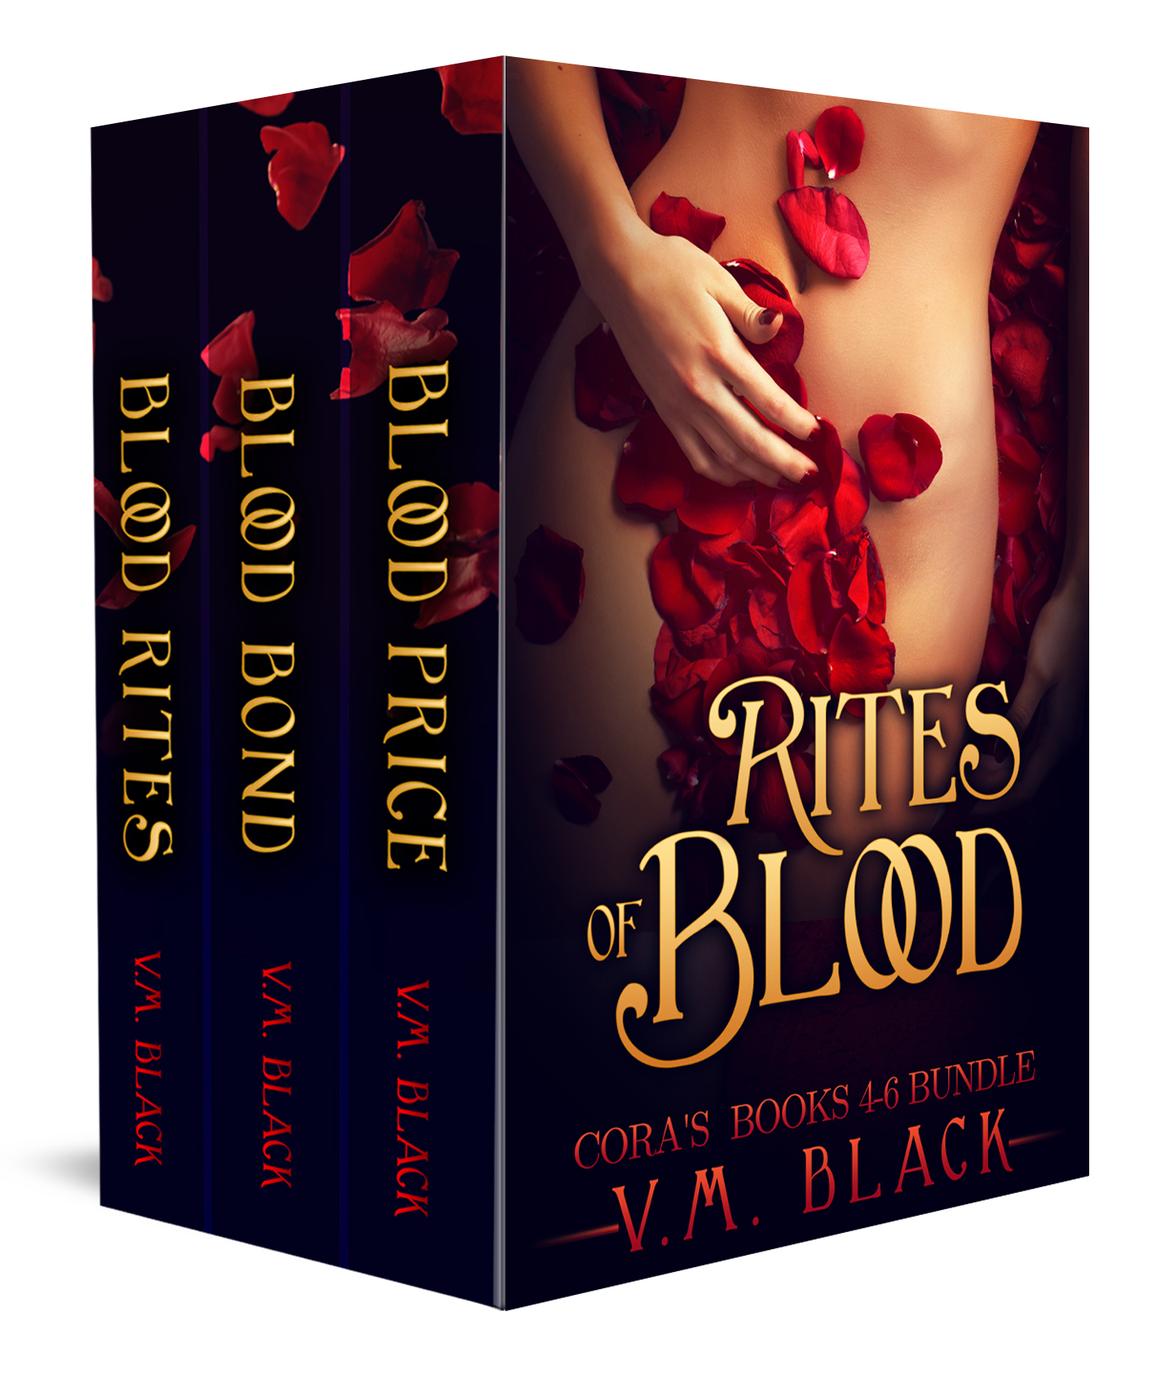 Rites of Blood: Cora's Choice Bunble 4-6 (2014) by V. M. Black